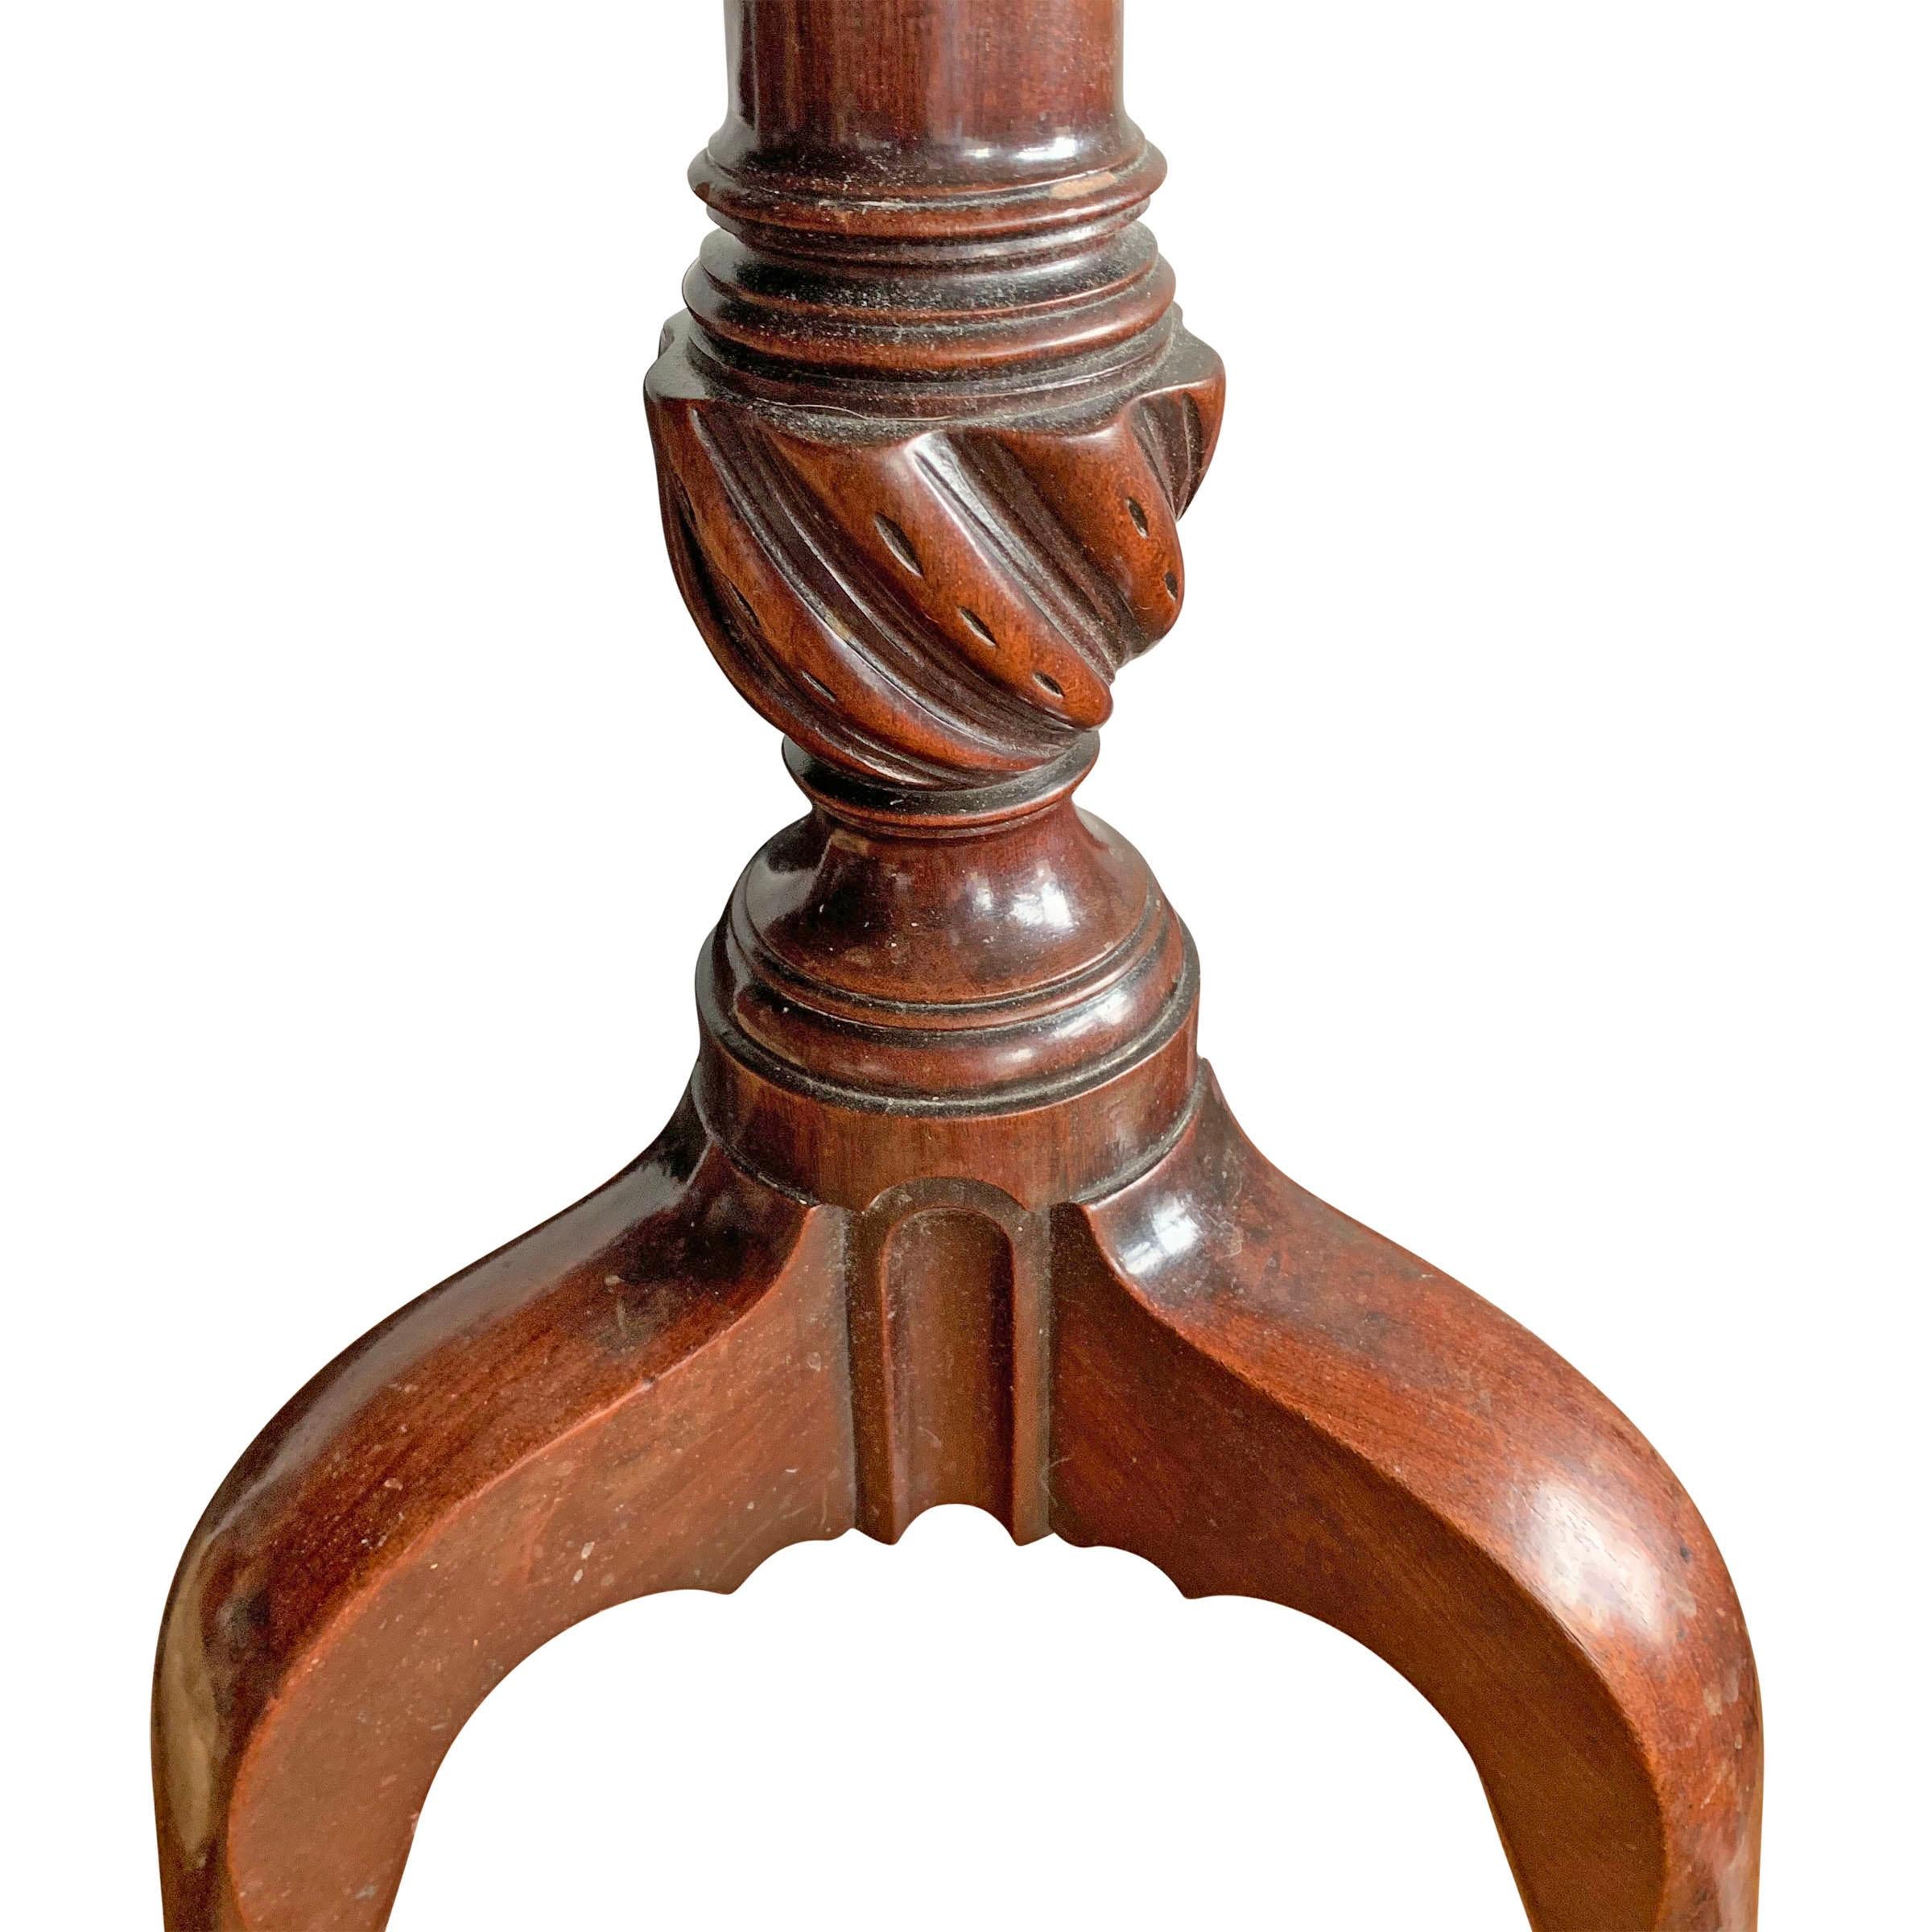 Mahogany 18th Century American Candle Stand